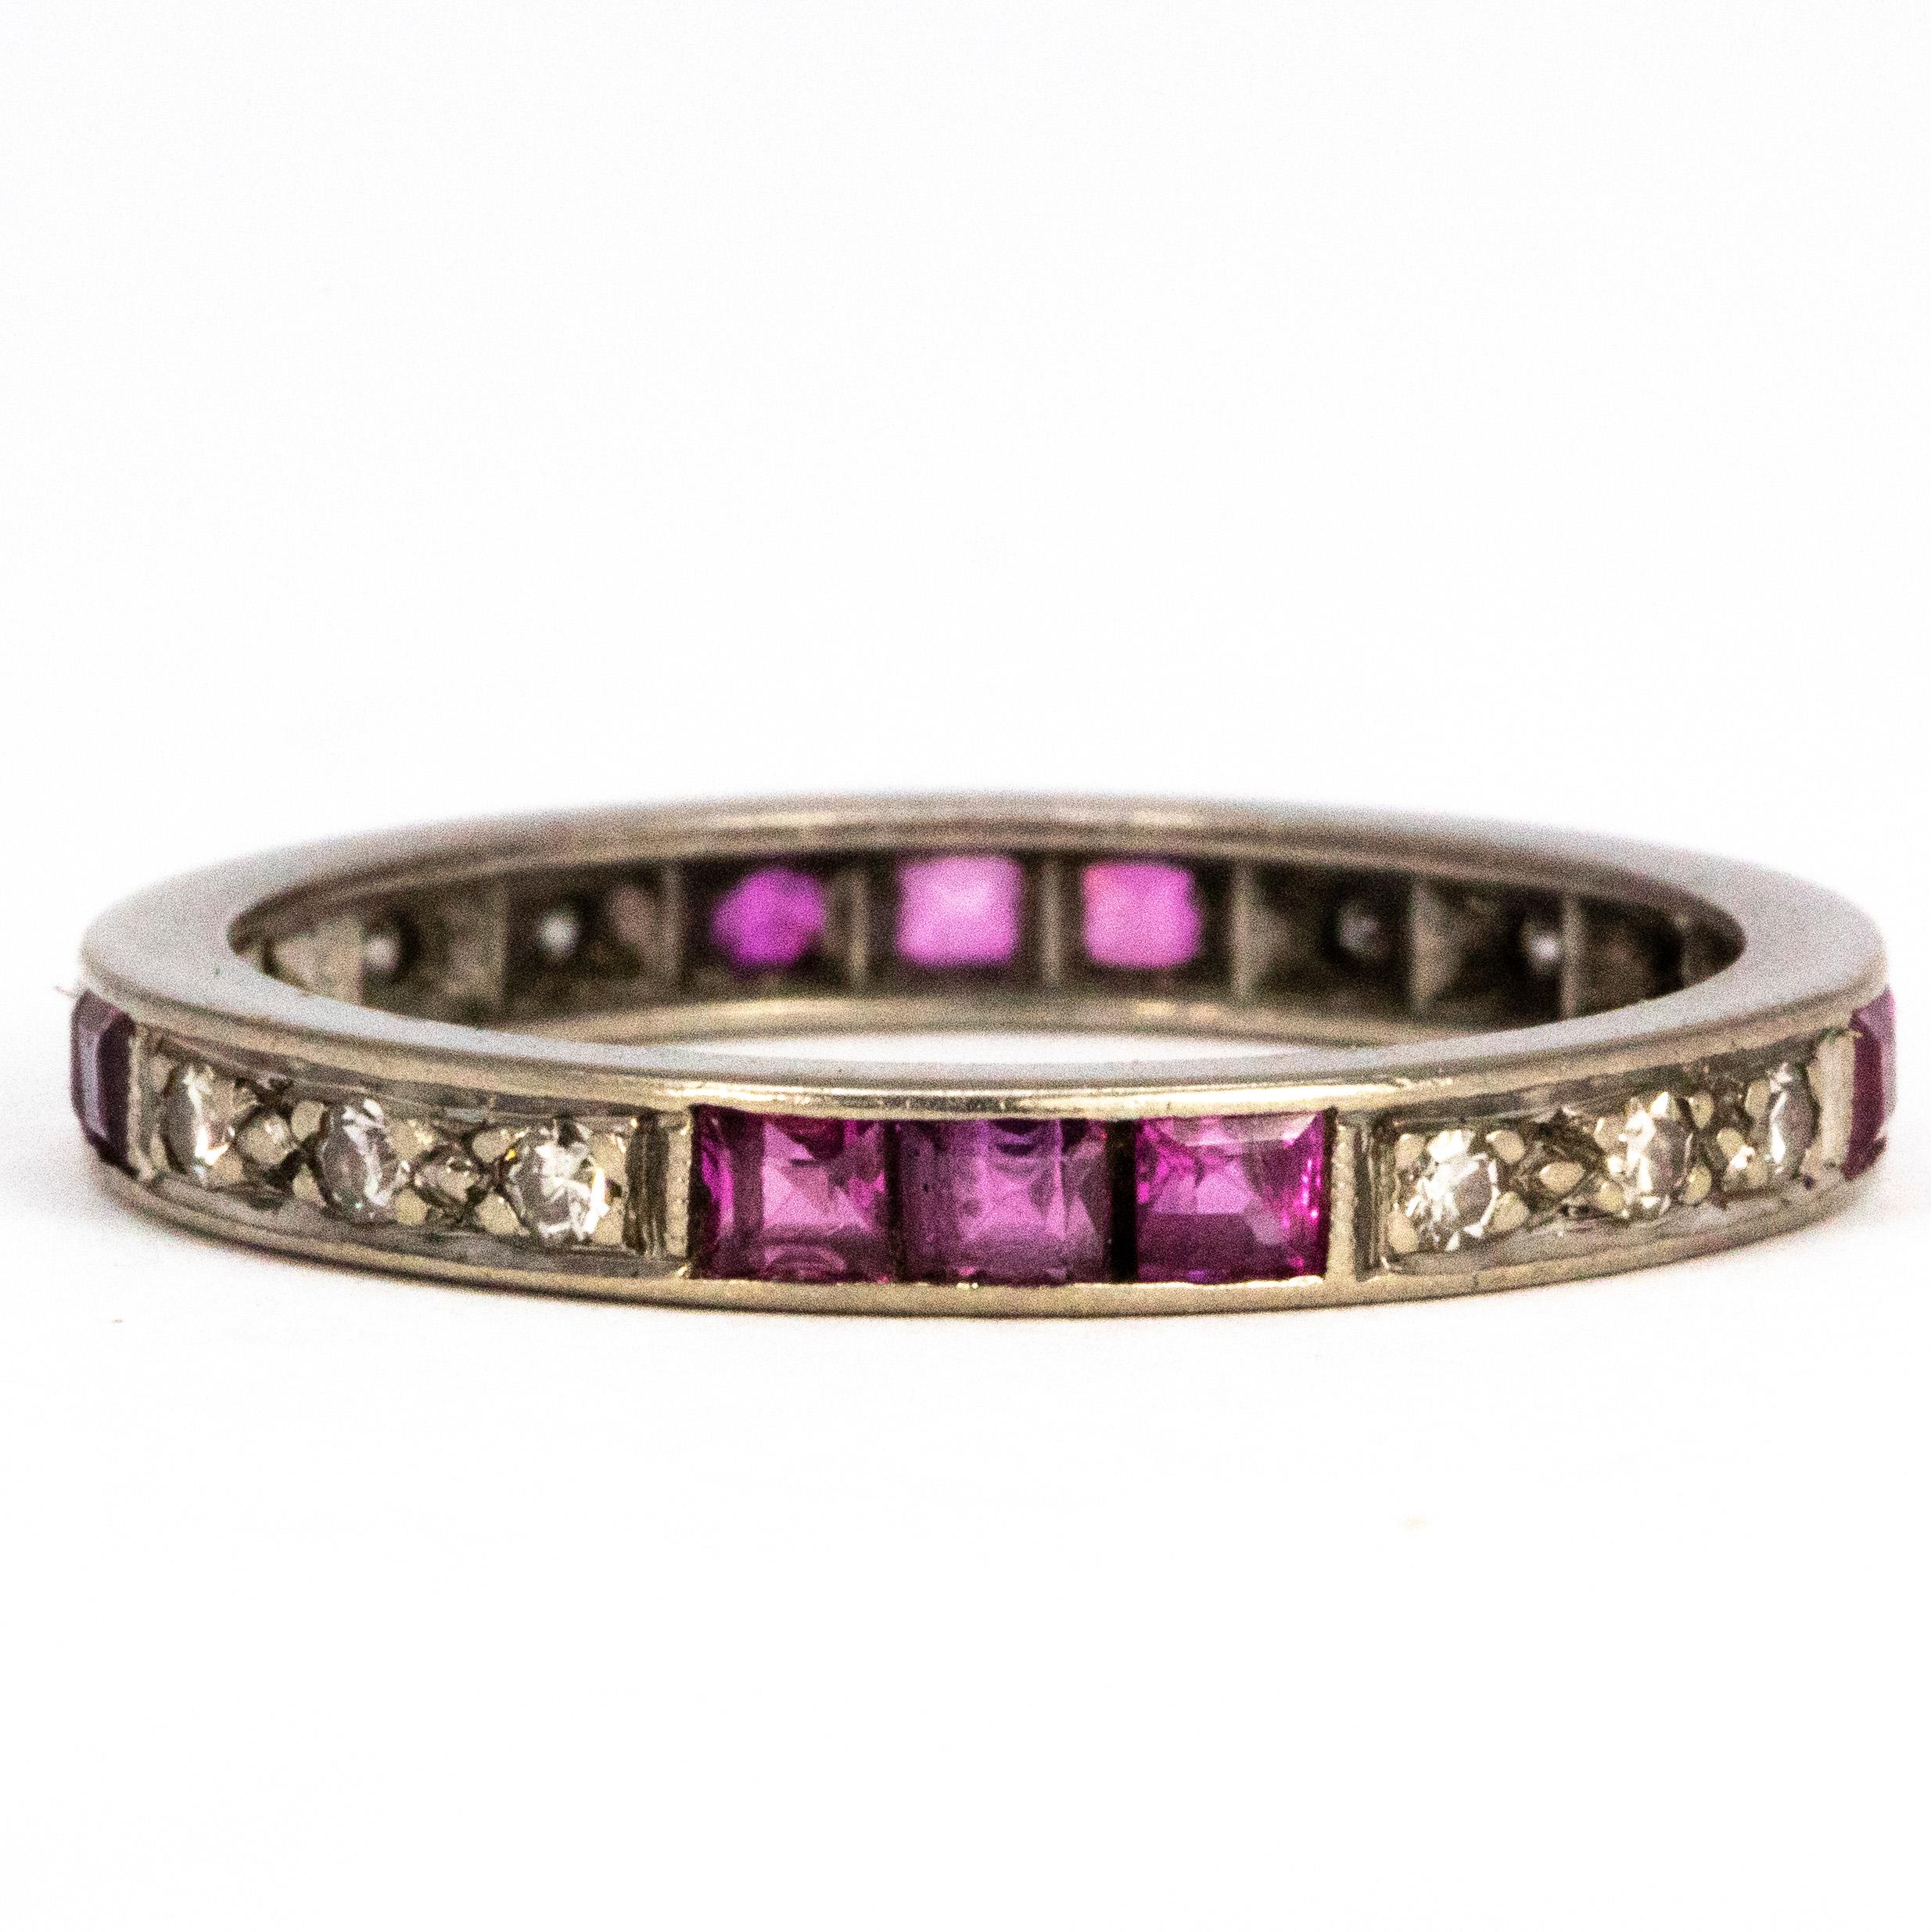 The 2pt rubies in this ring are square cut and are set in threes. The diamonds measure 3pts each and are also set in threes which breaks the colour up beautifully. 

Ring Size: N 1/2 or 7 
Band Width: 2mm 